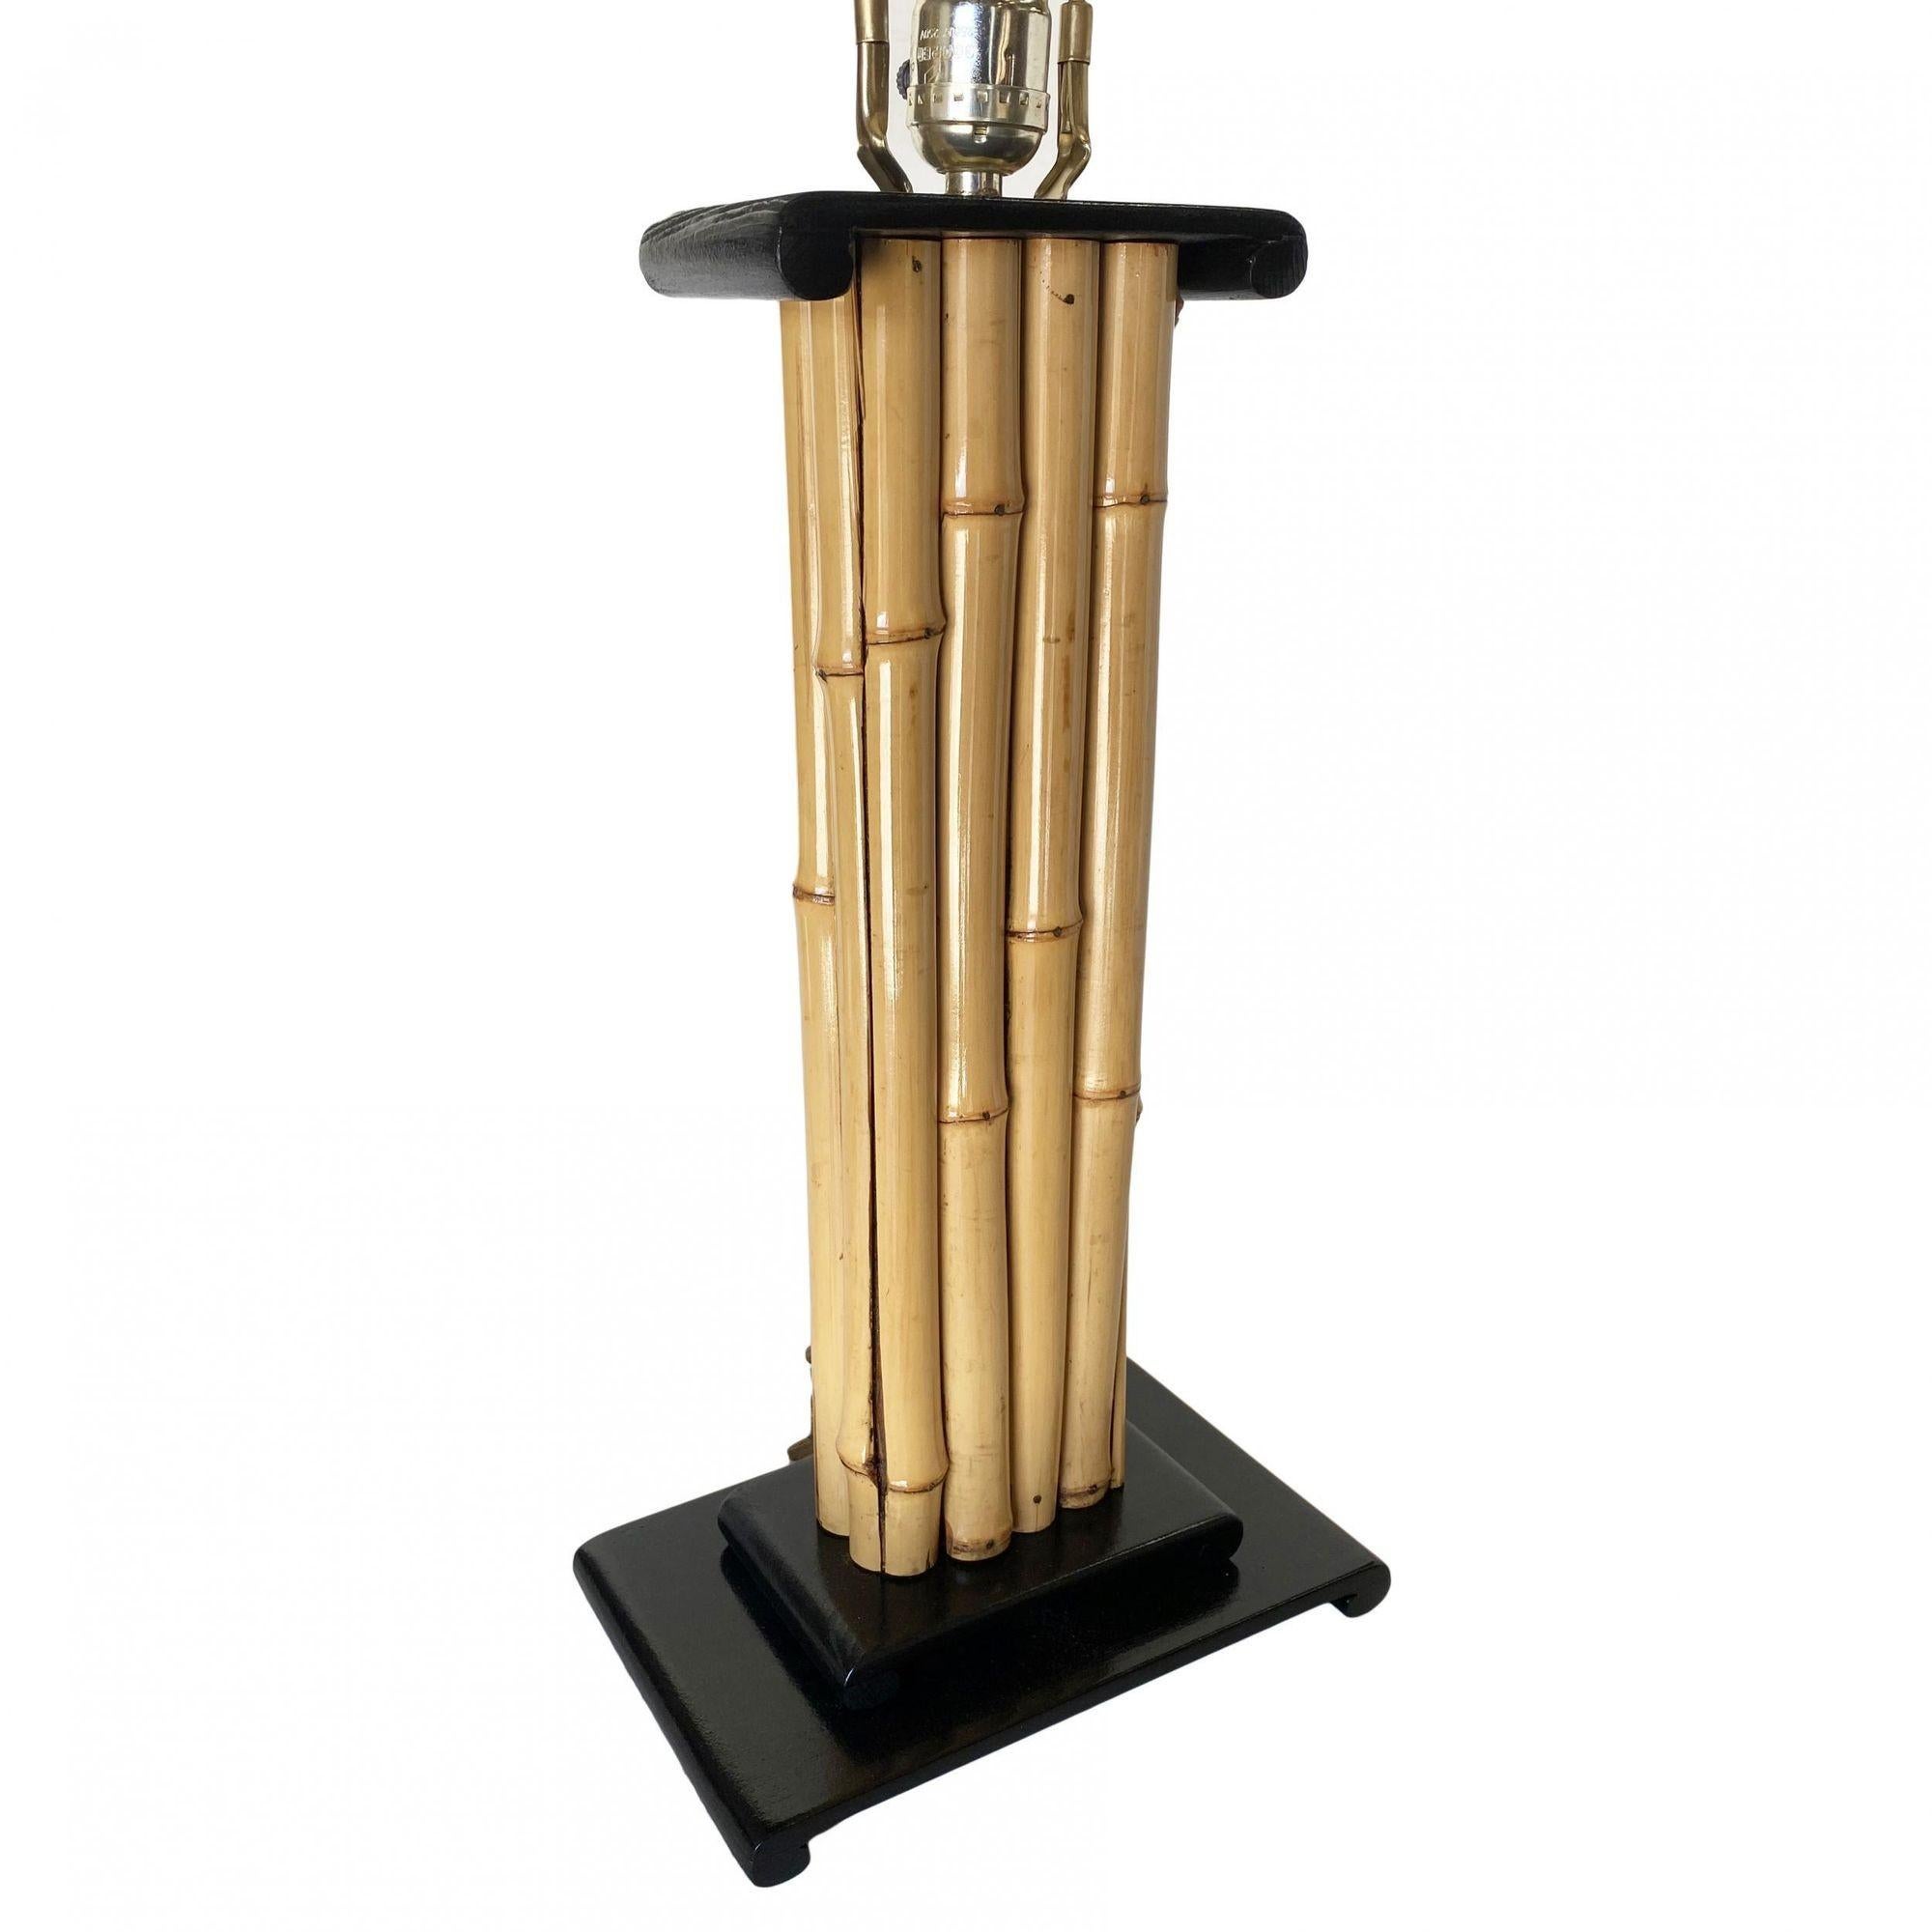 Vertically stacked rattan pole lamp with black lacquer demi mahogany base and top cap piece. Wire for standard 120v North American plugs.
1950, United States
We only purchase and sell only the best and finest rattan furniture made by the best and